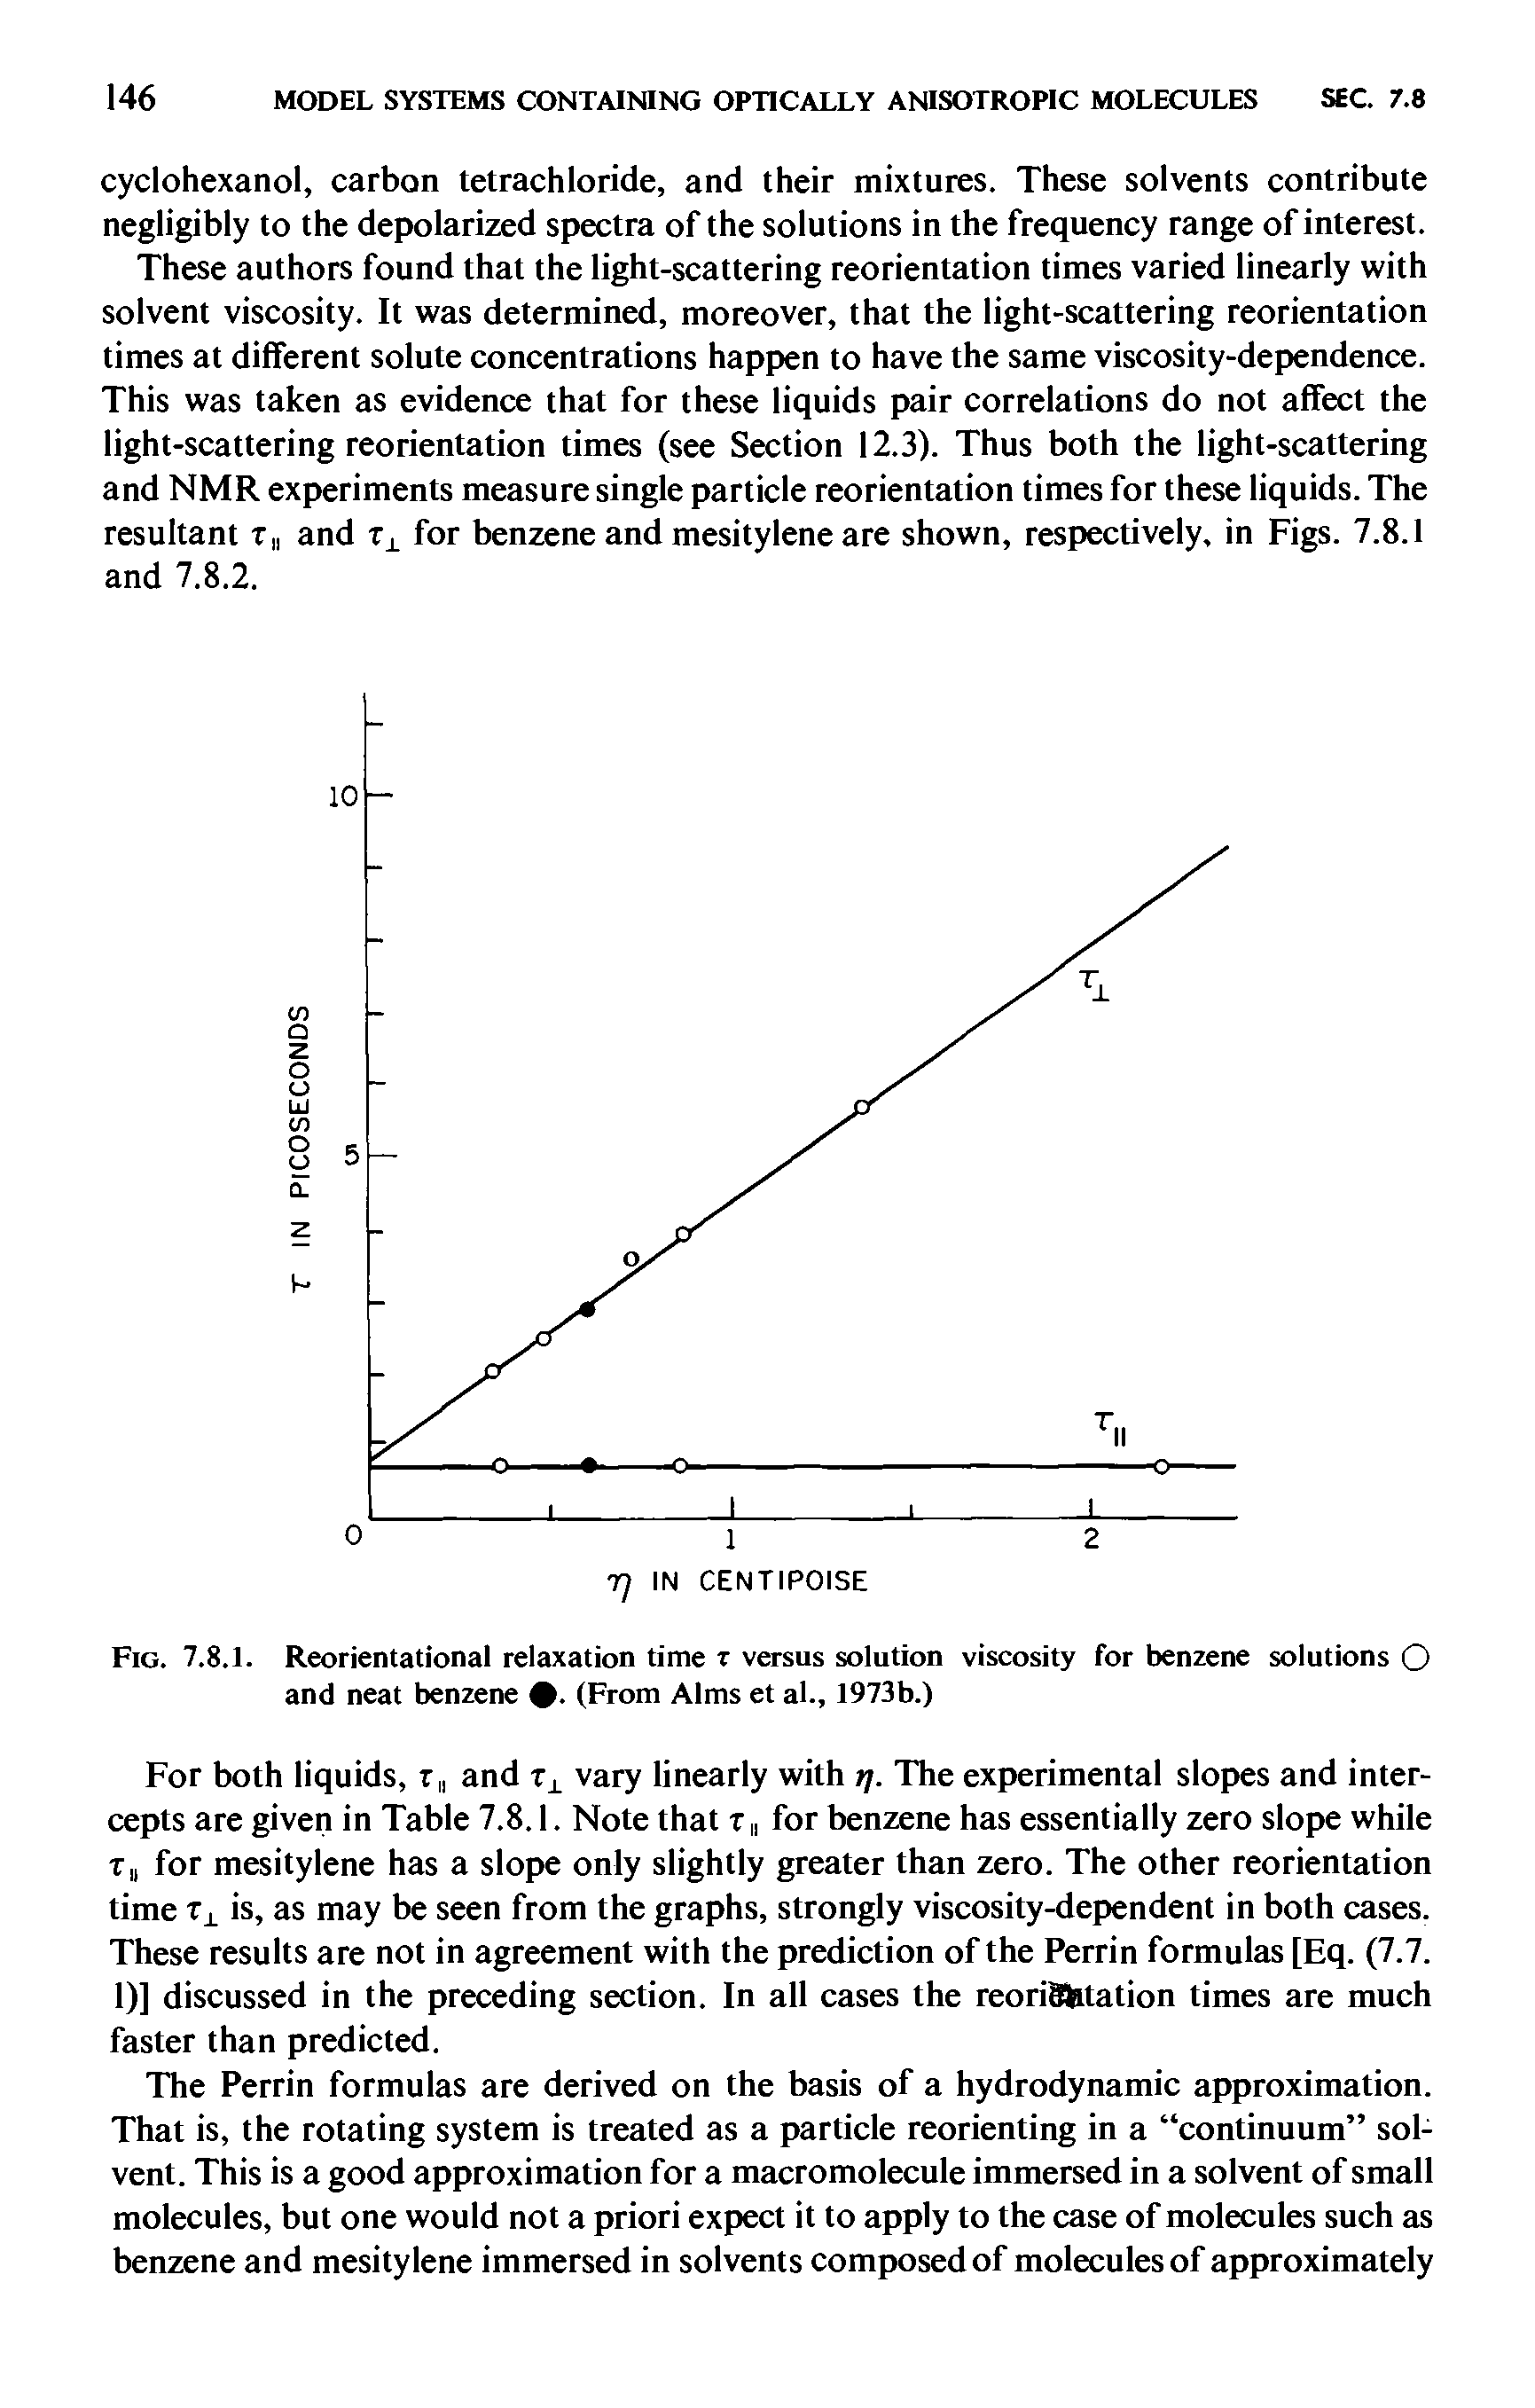 Fig. 7.8.1. Reorientational relaxation time t versus solution viscosity for benzene solutions O and neat benzene. (From Alms et al., 1973b.)...